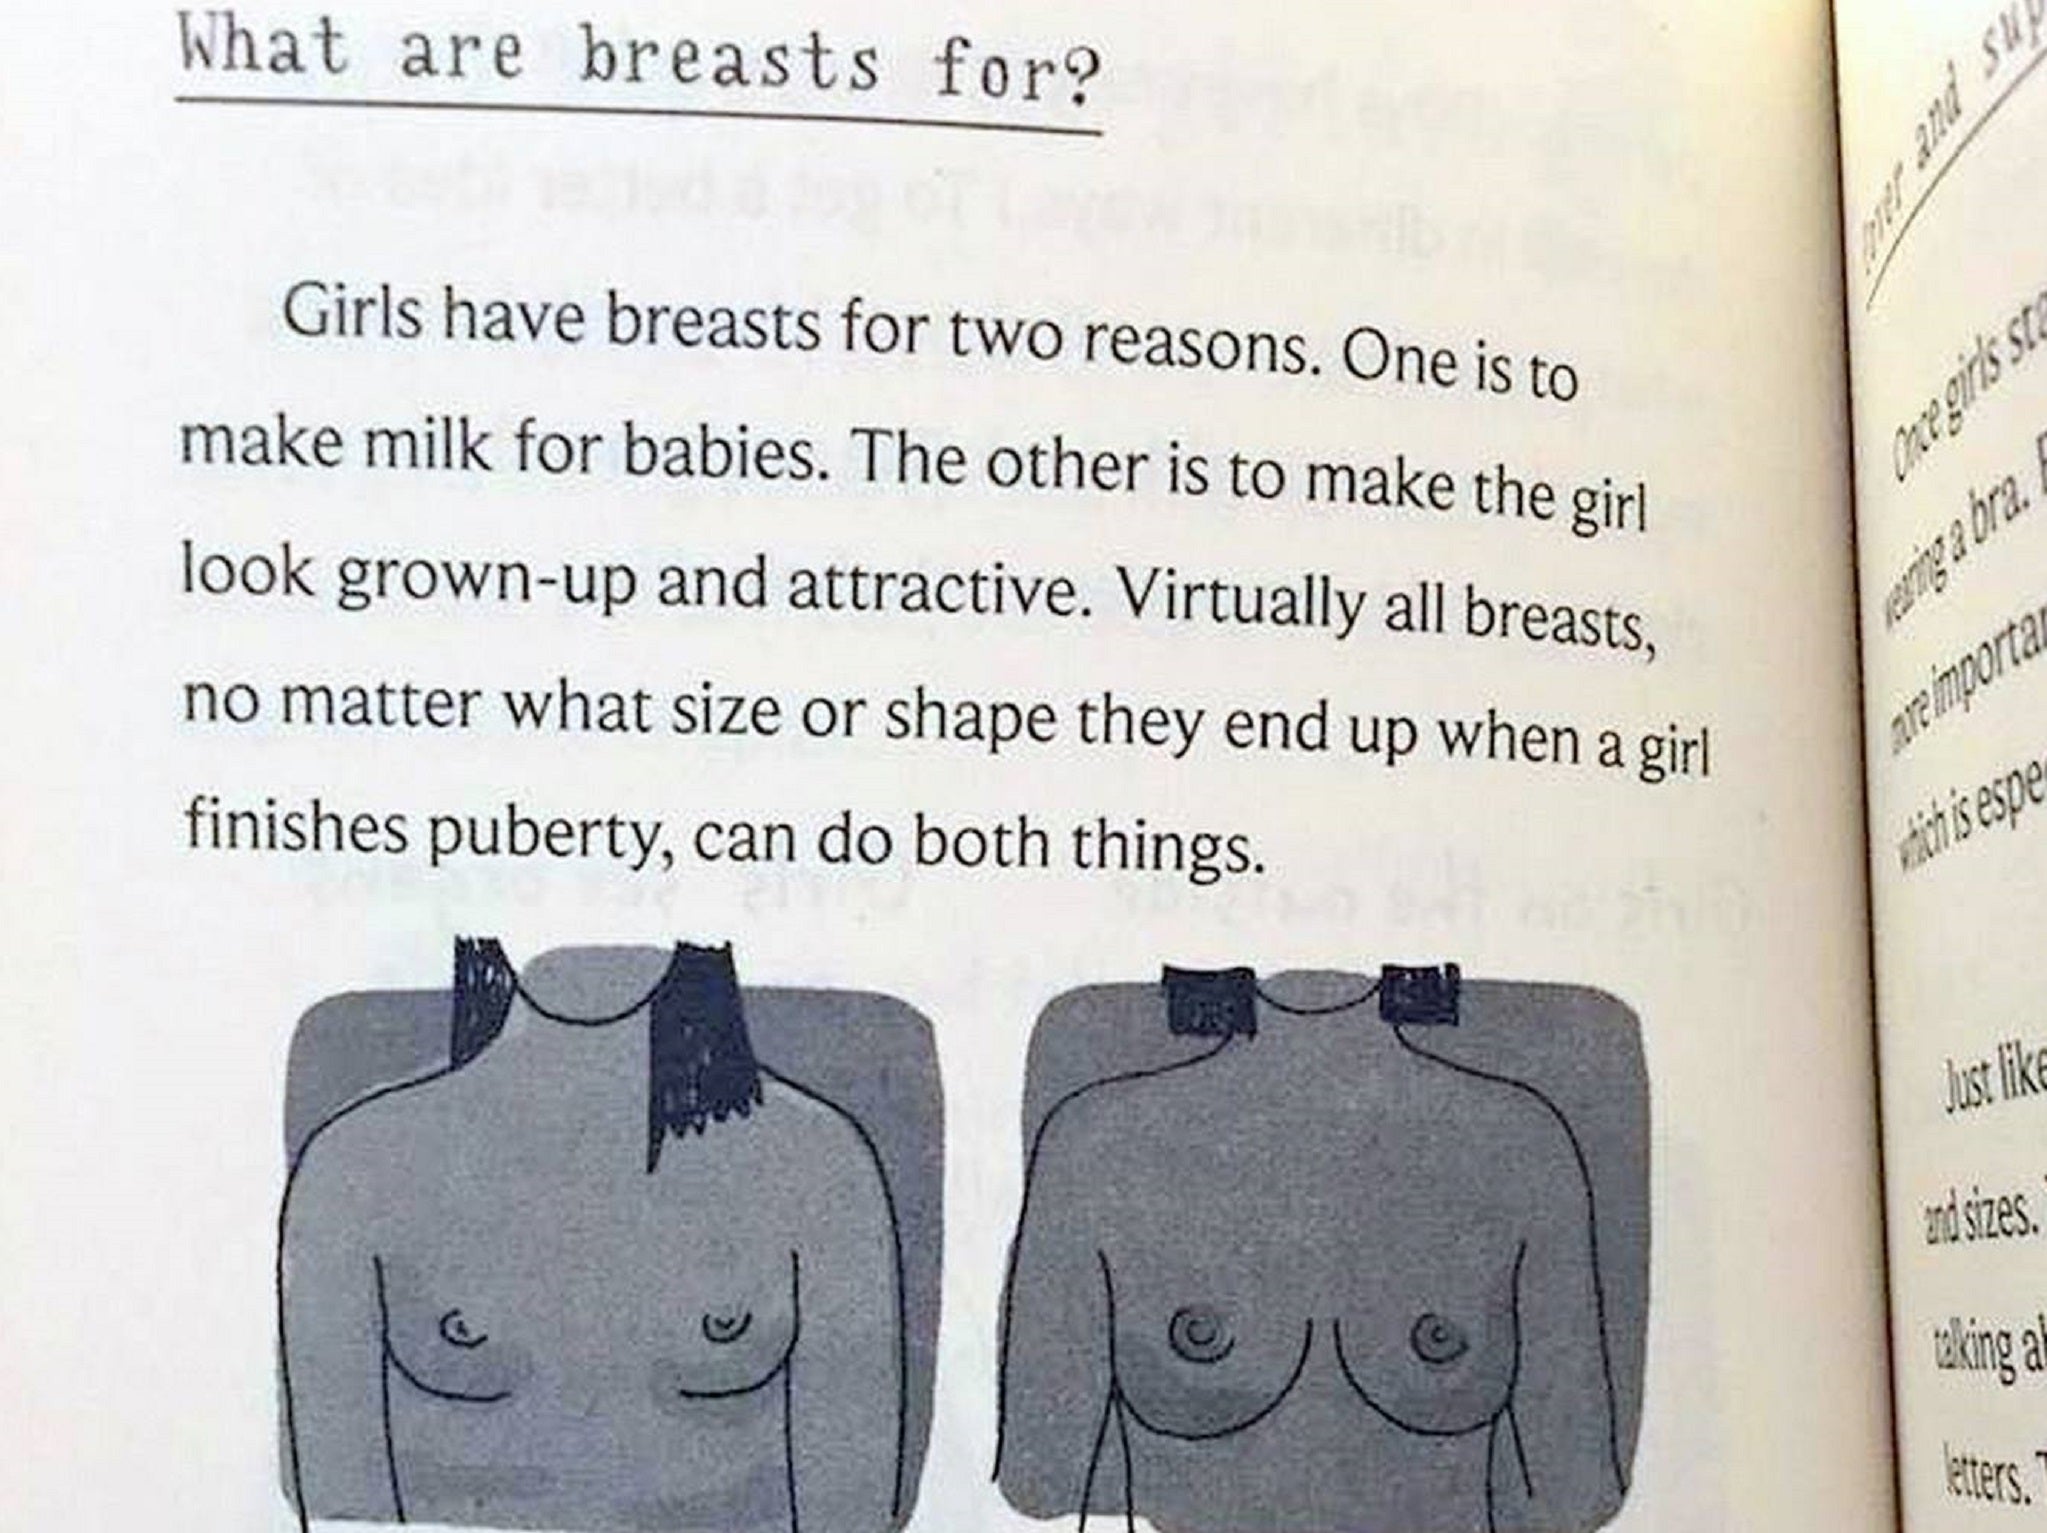 The book states girls develop breasts to make them look grown up and attractive